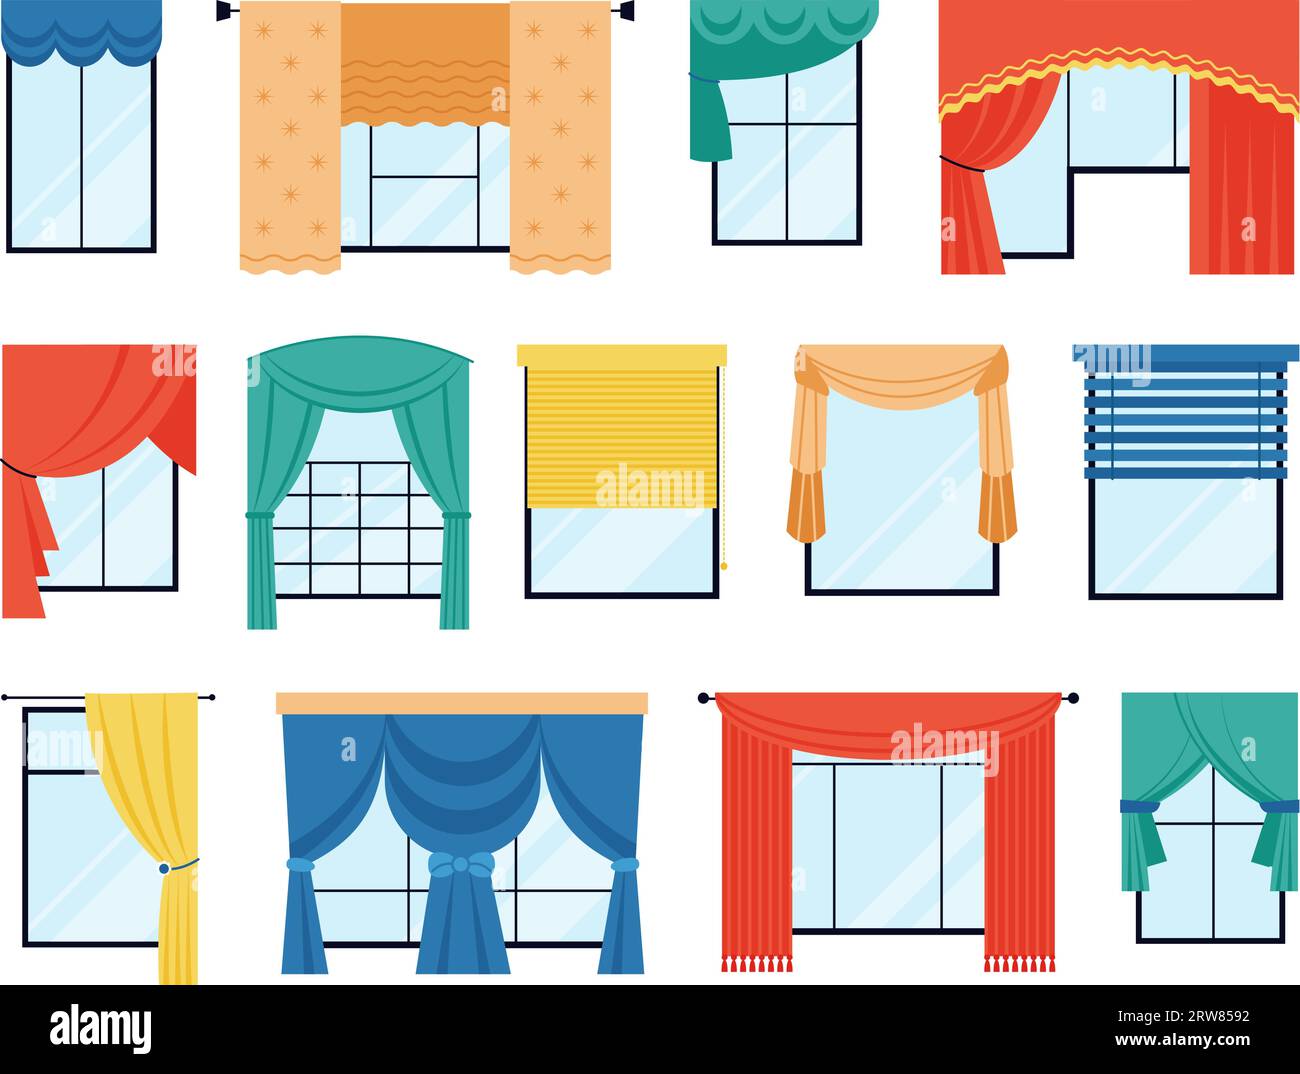 Window curtains and blinds. Isolated windows with fabric decor, flat interior decorative design. Modern and retro drapes decent vector set Stock Vector